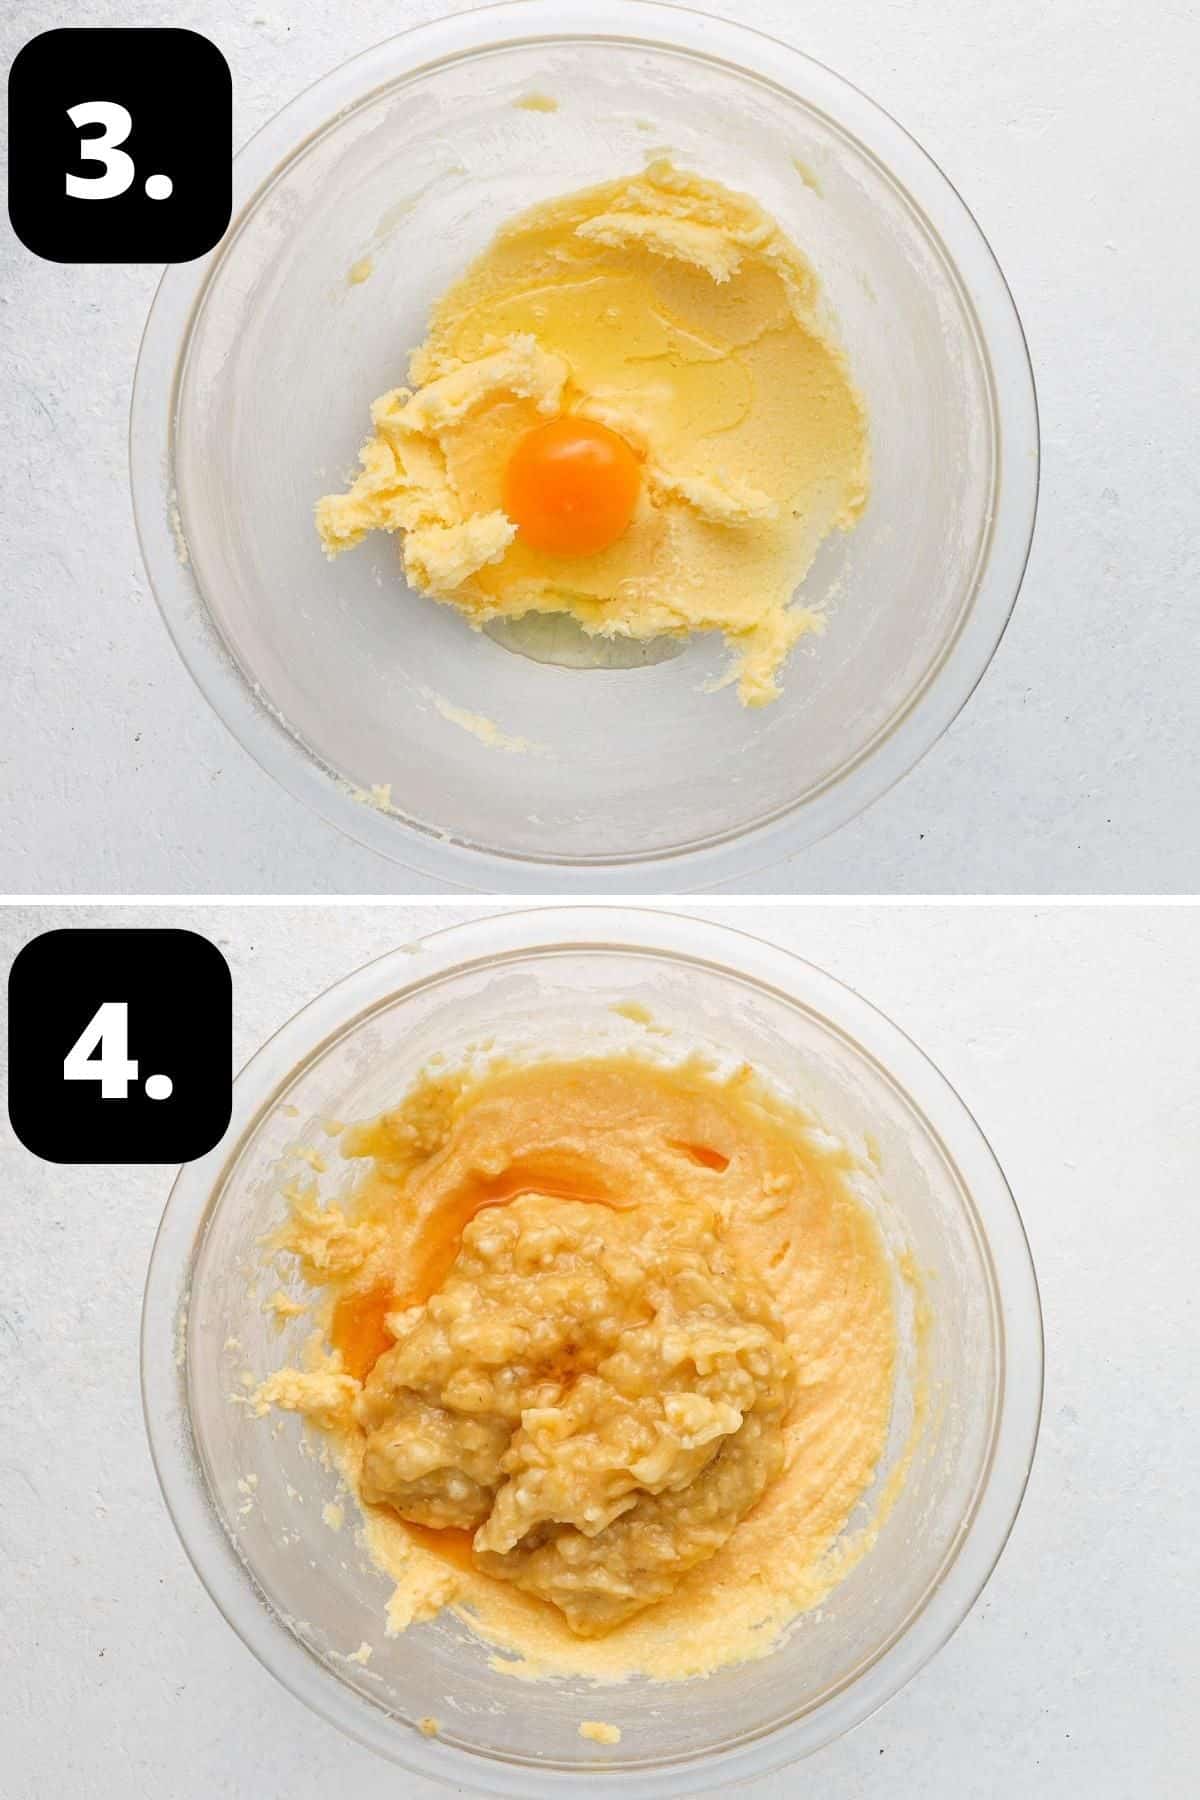 Steps 3-4 of preparing this recipe - adding an egg to sugar butter mix and then adding banana and vanilla.